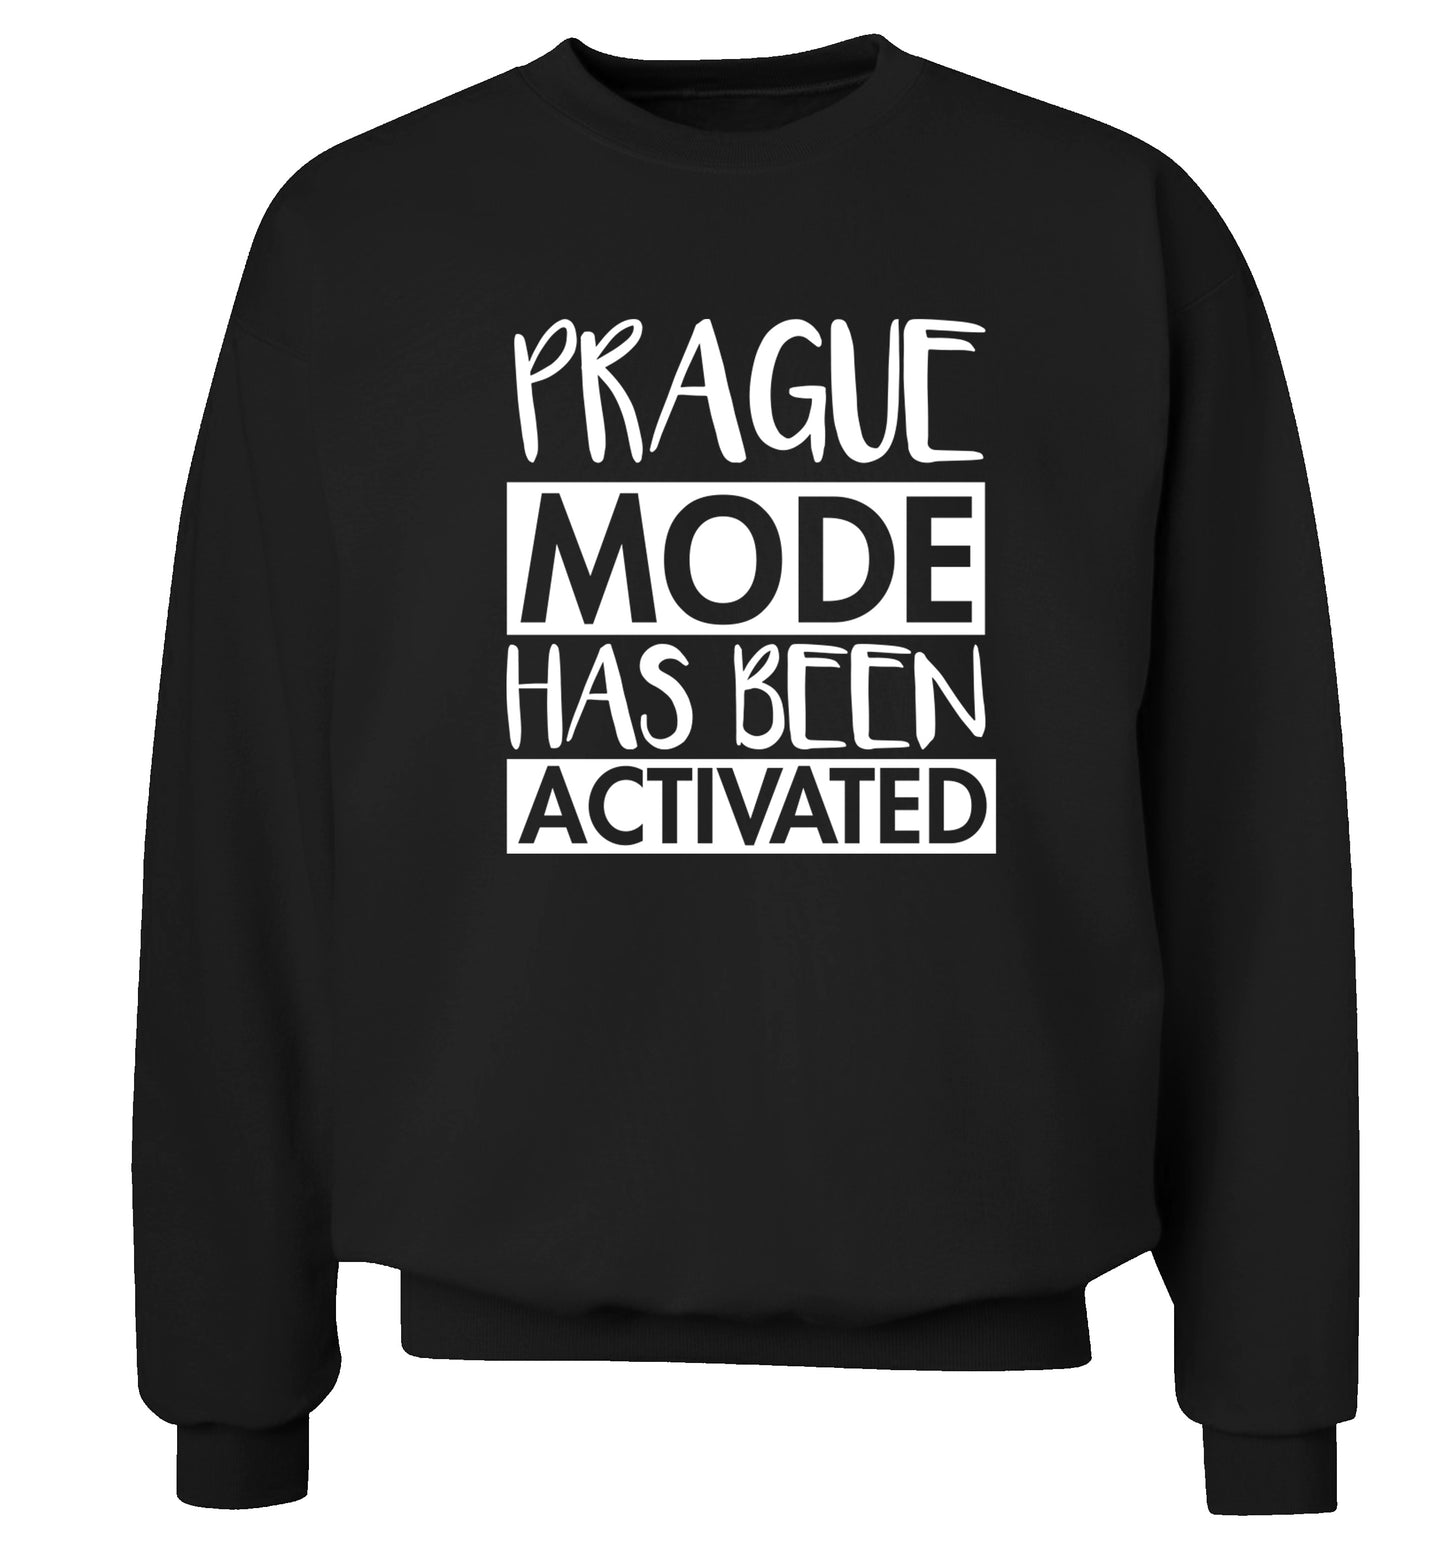 Prague mode has been activated Adult's unisex black Sweater 2XL